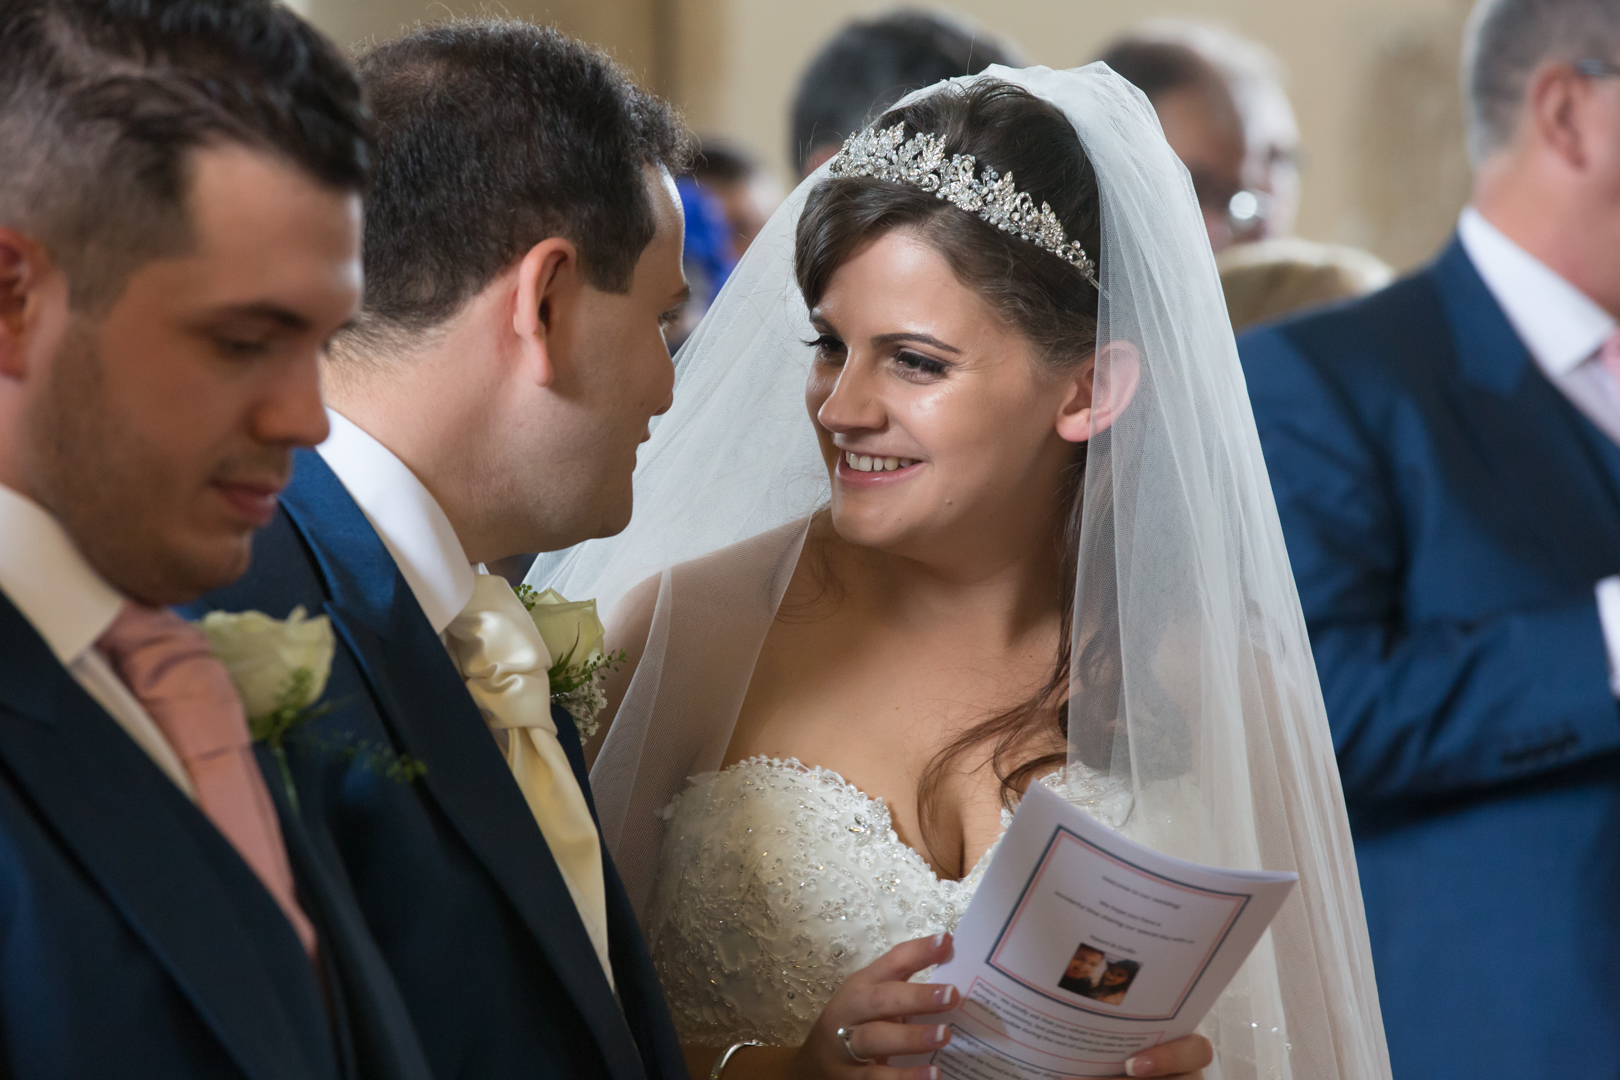 Naomi and Emilio photographed at St Lawrence's Church, Eastcote, Pinner, Middlesex by Tim & Linda Durham of Pinner Wedding Photograph